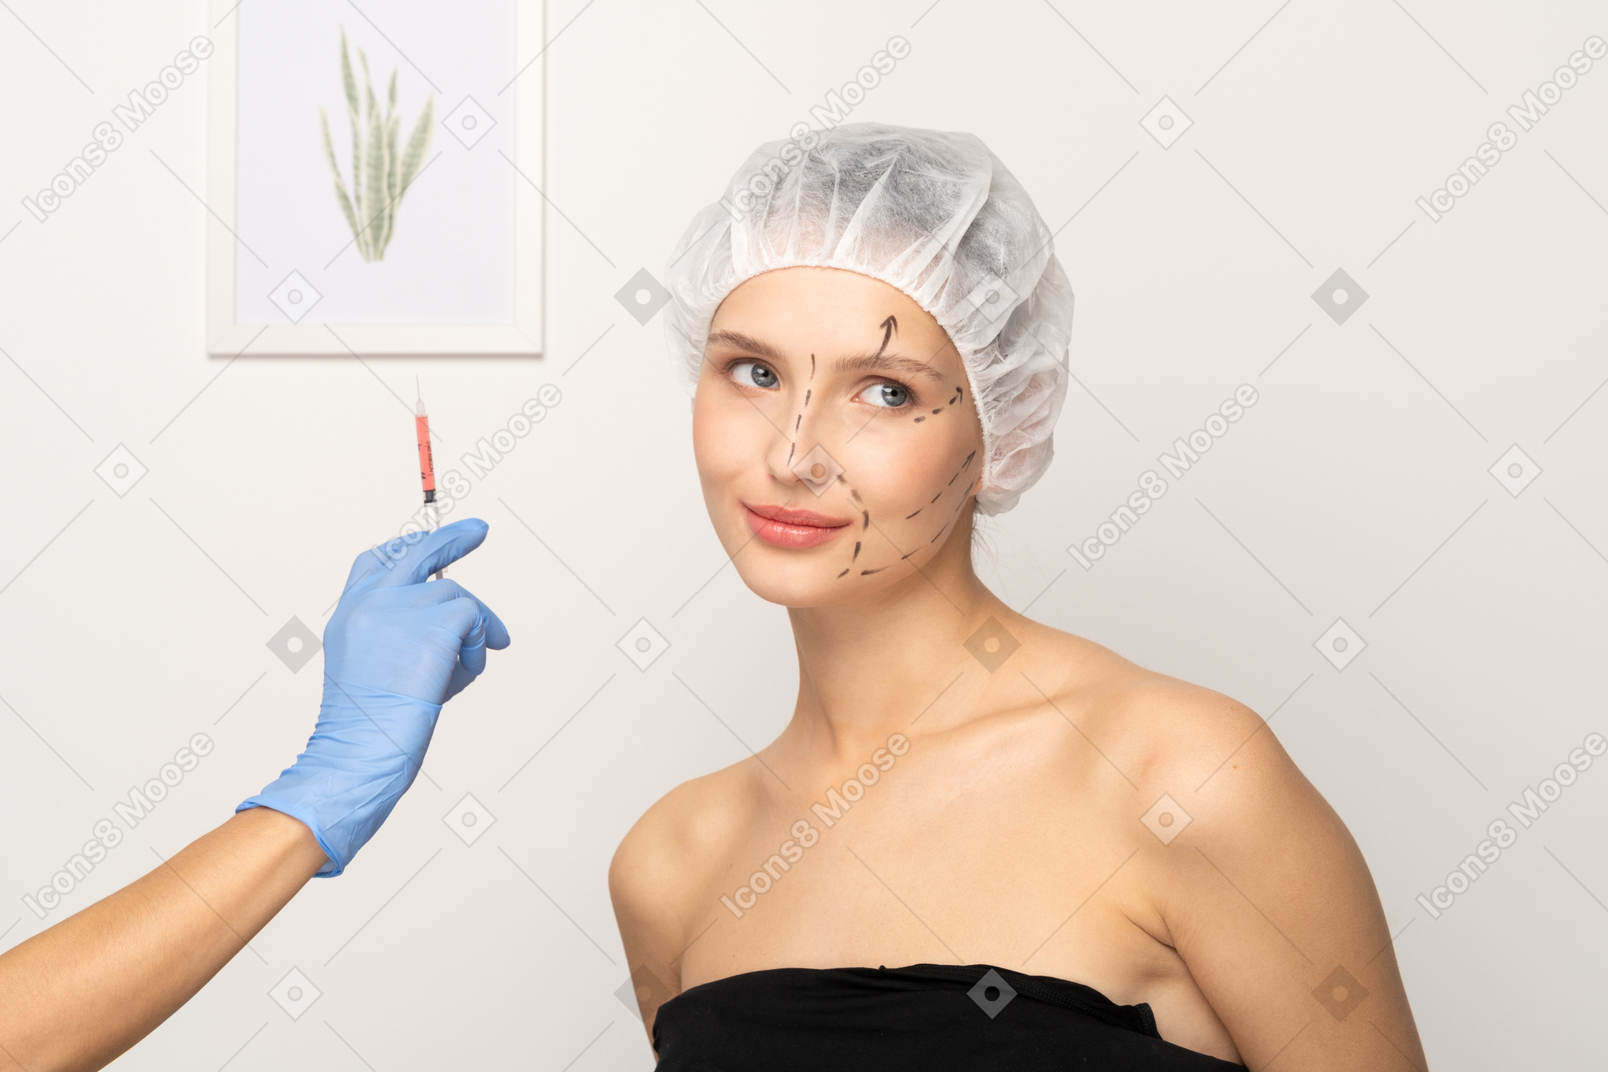 Cheerful young woman and hand holding syringe